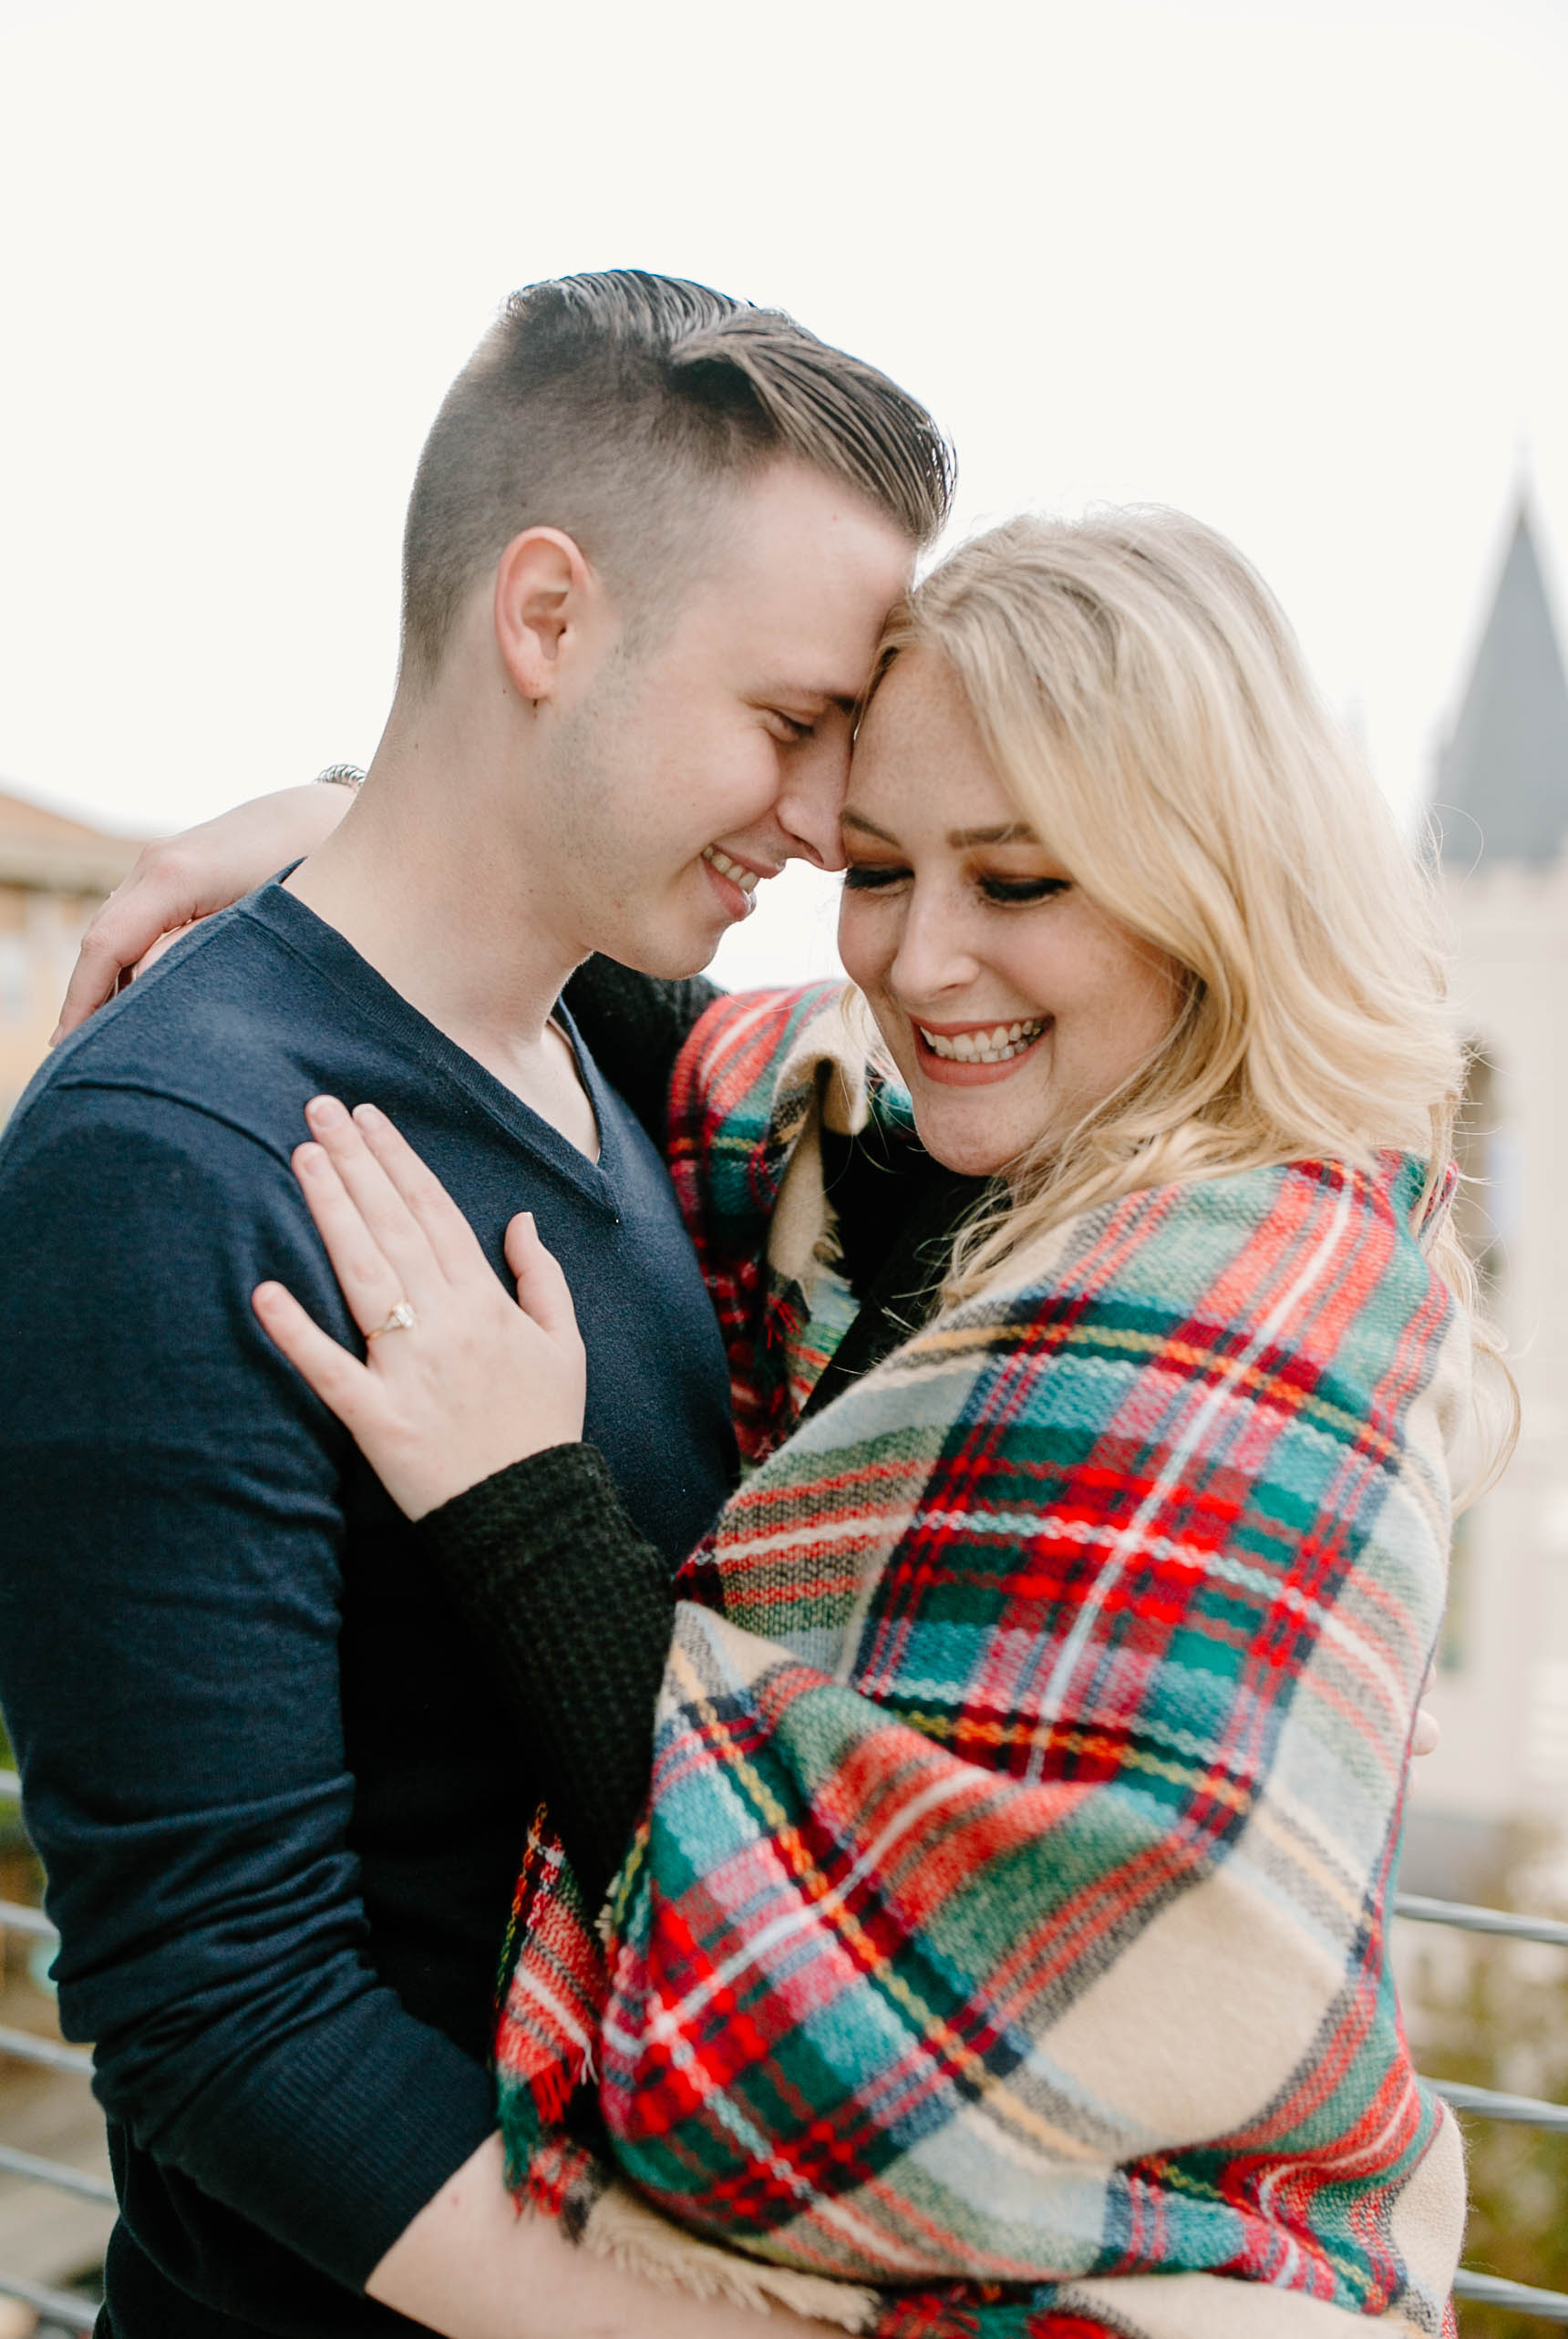 Downtown Greenville Engagement Photos